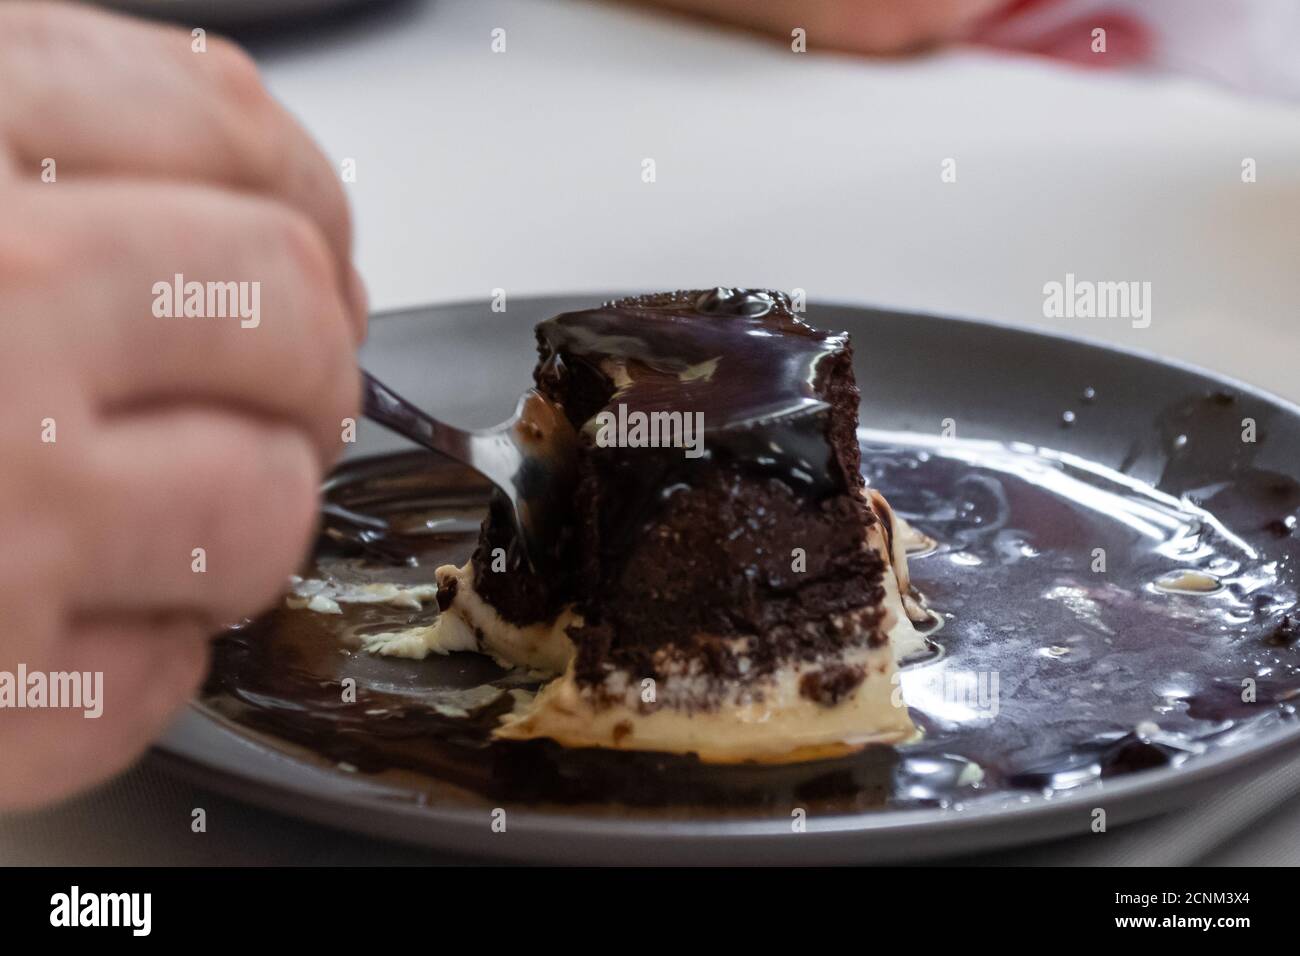 close-up of a person's hand with a spoon about to eat a piece of cake Stock Photo